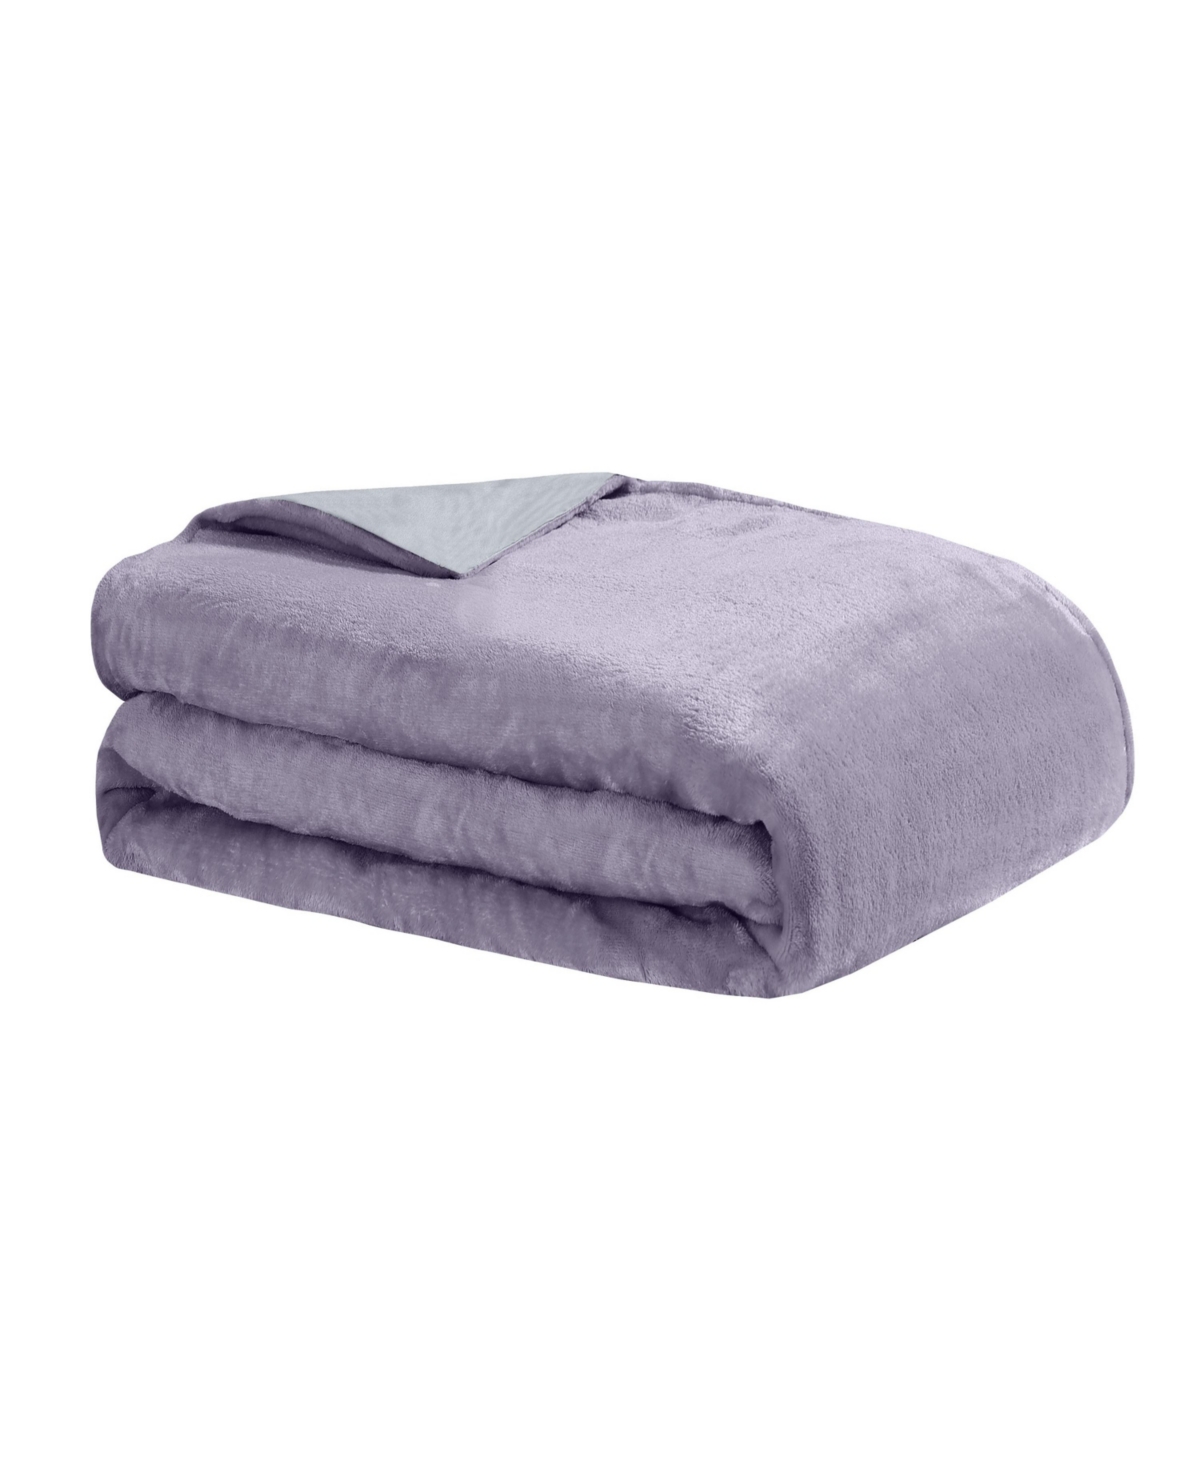 Dreamlab Crystal Reversible Cooling Blanket With Removable Cover, 48" X 72" In Lavender